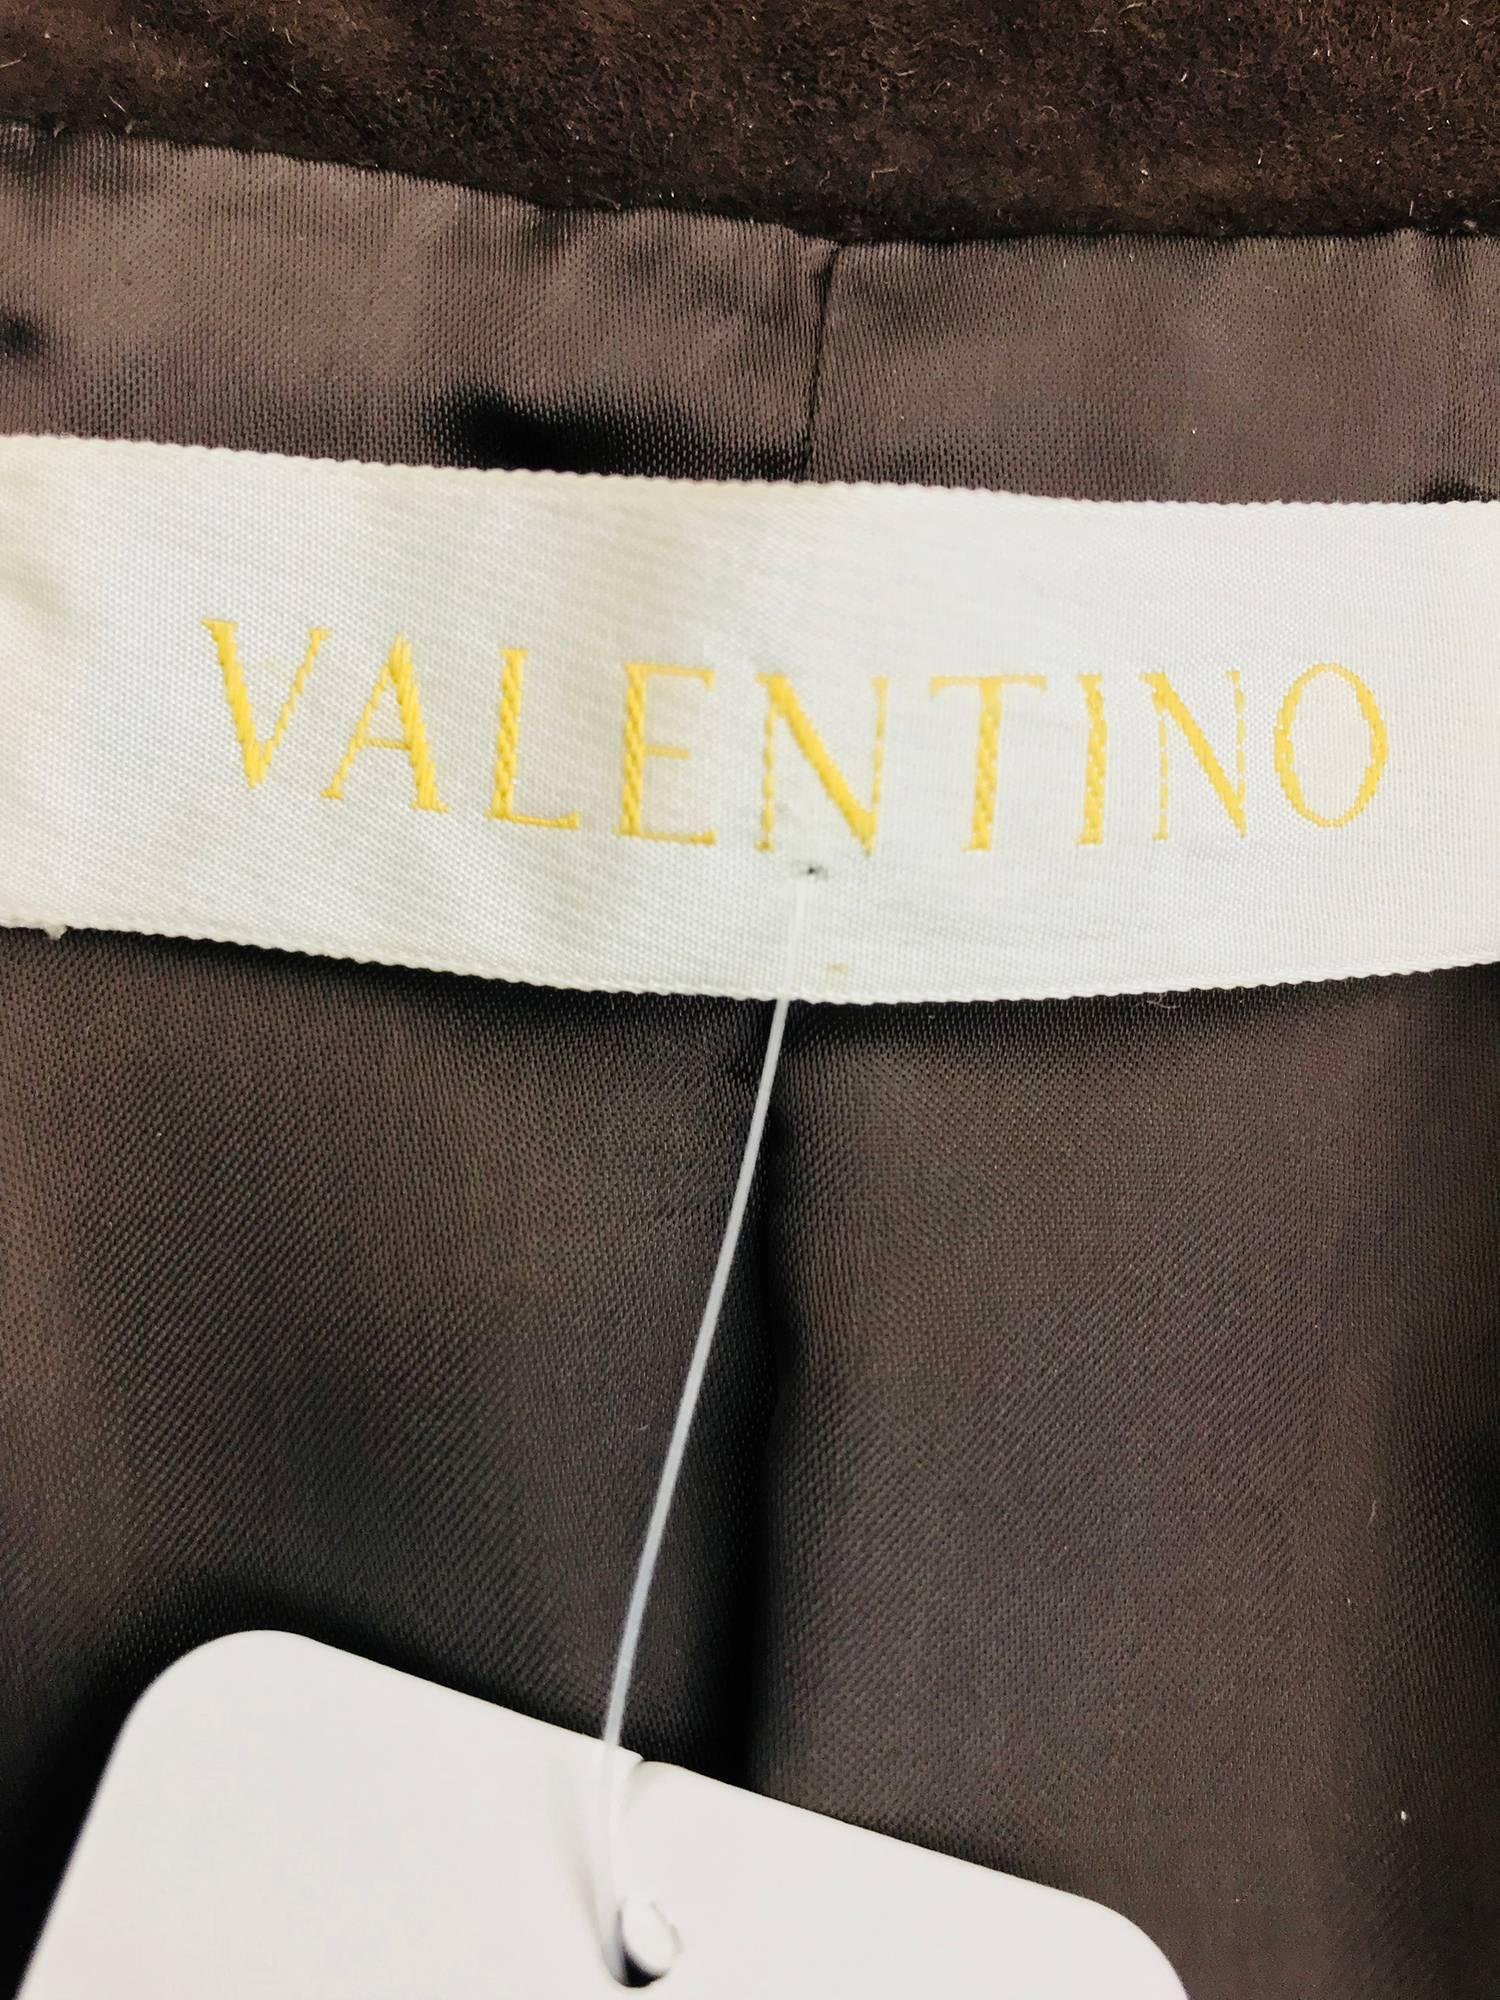 Valentino Chocolate brown top stitched suede jacket For Sale 9